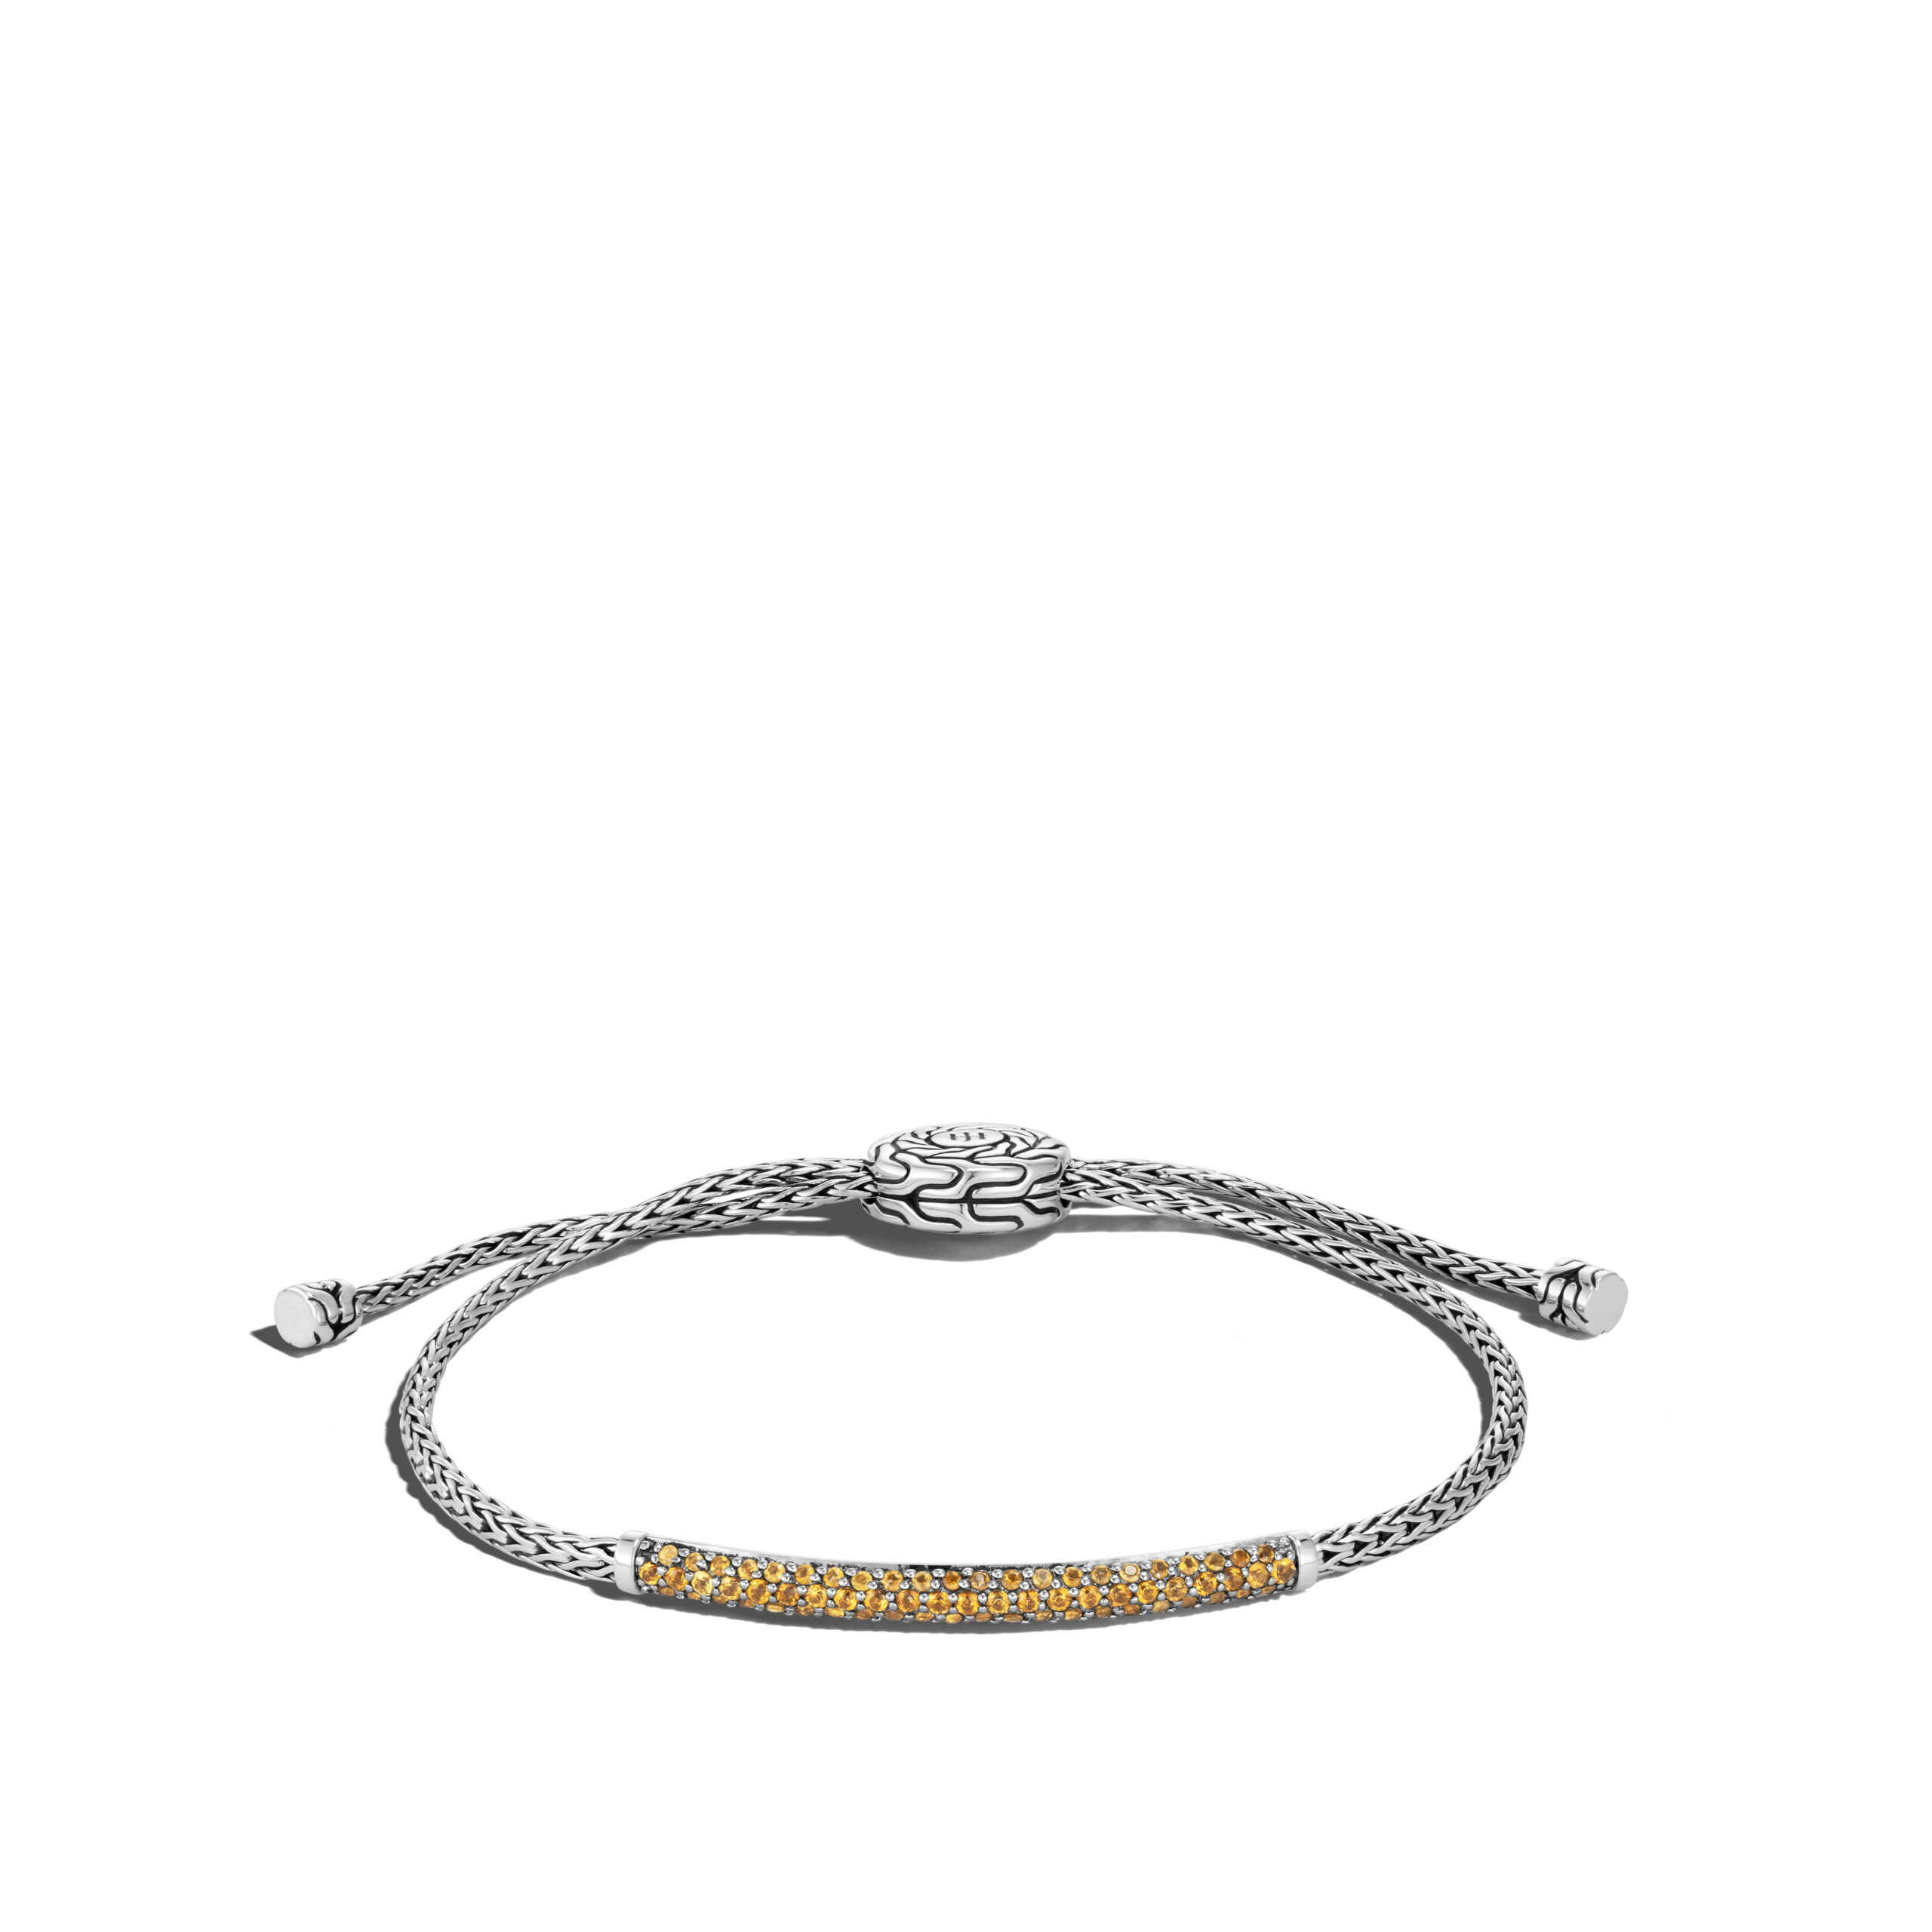 This bracelet by John Hardy is crafted from sterling silver and features citrine.